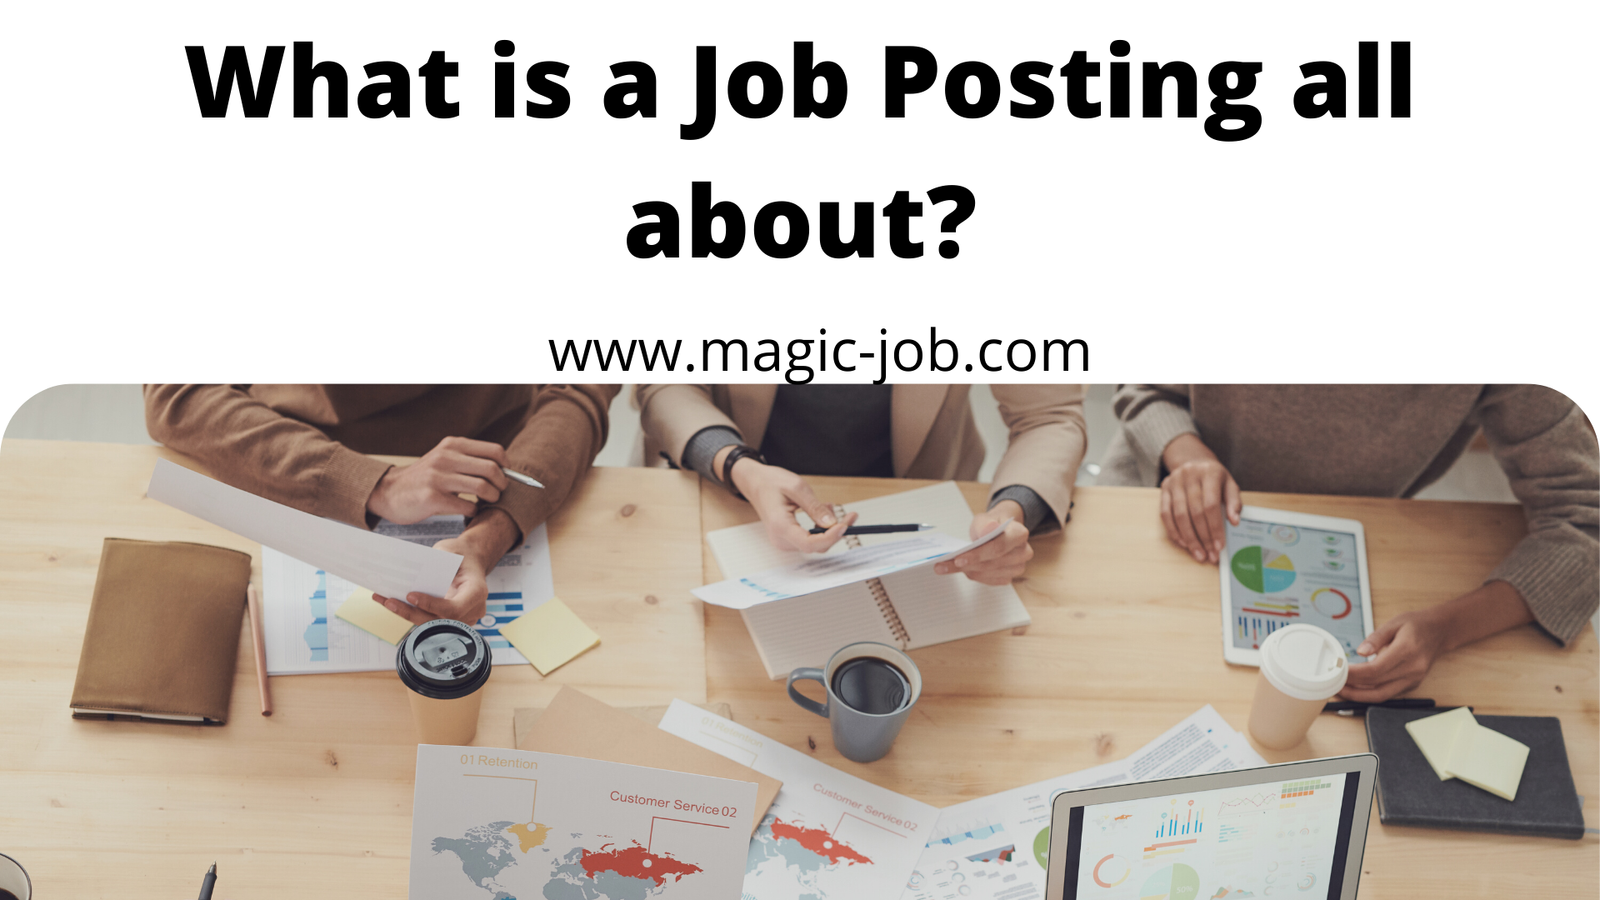 What is a Job Posting all about? image